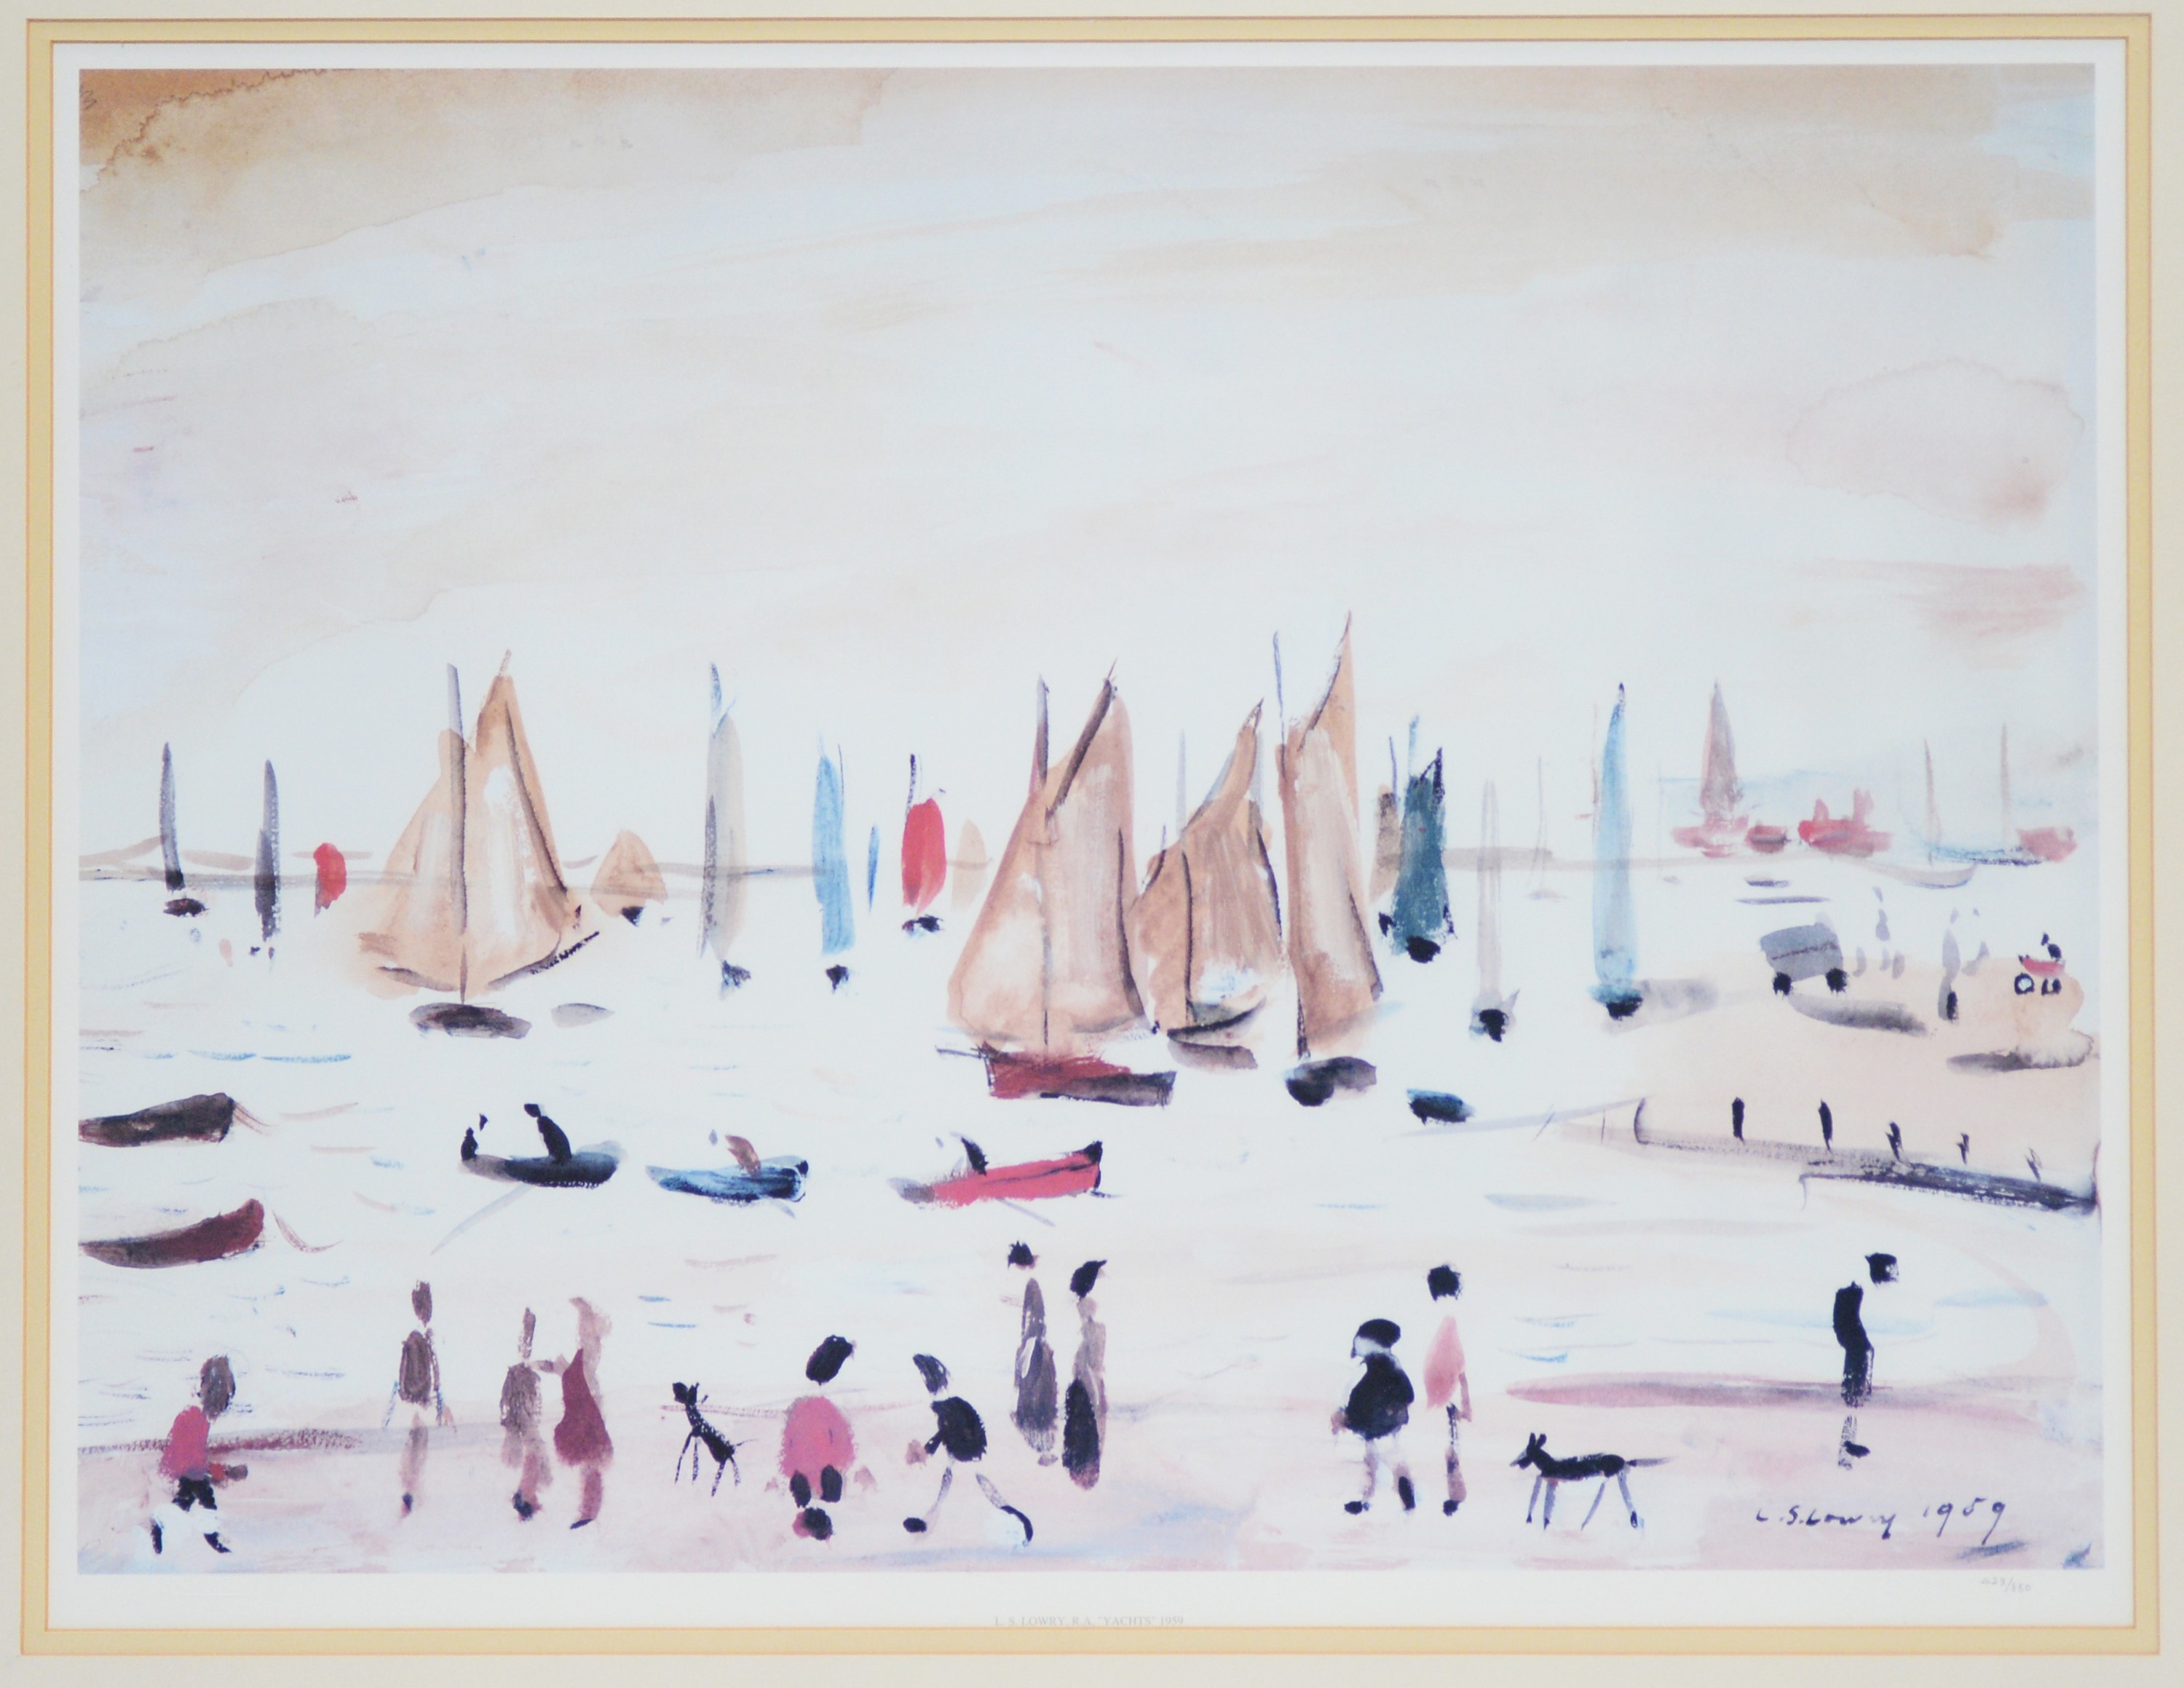 Yachts by Laurence Stephen Lowry